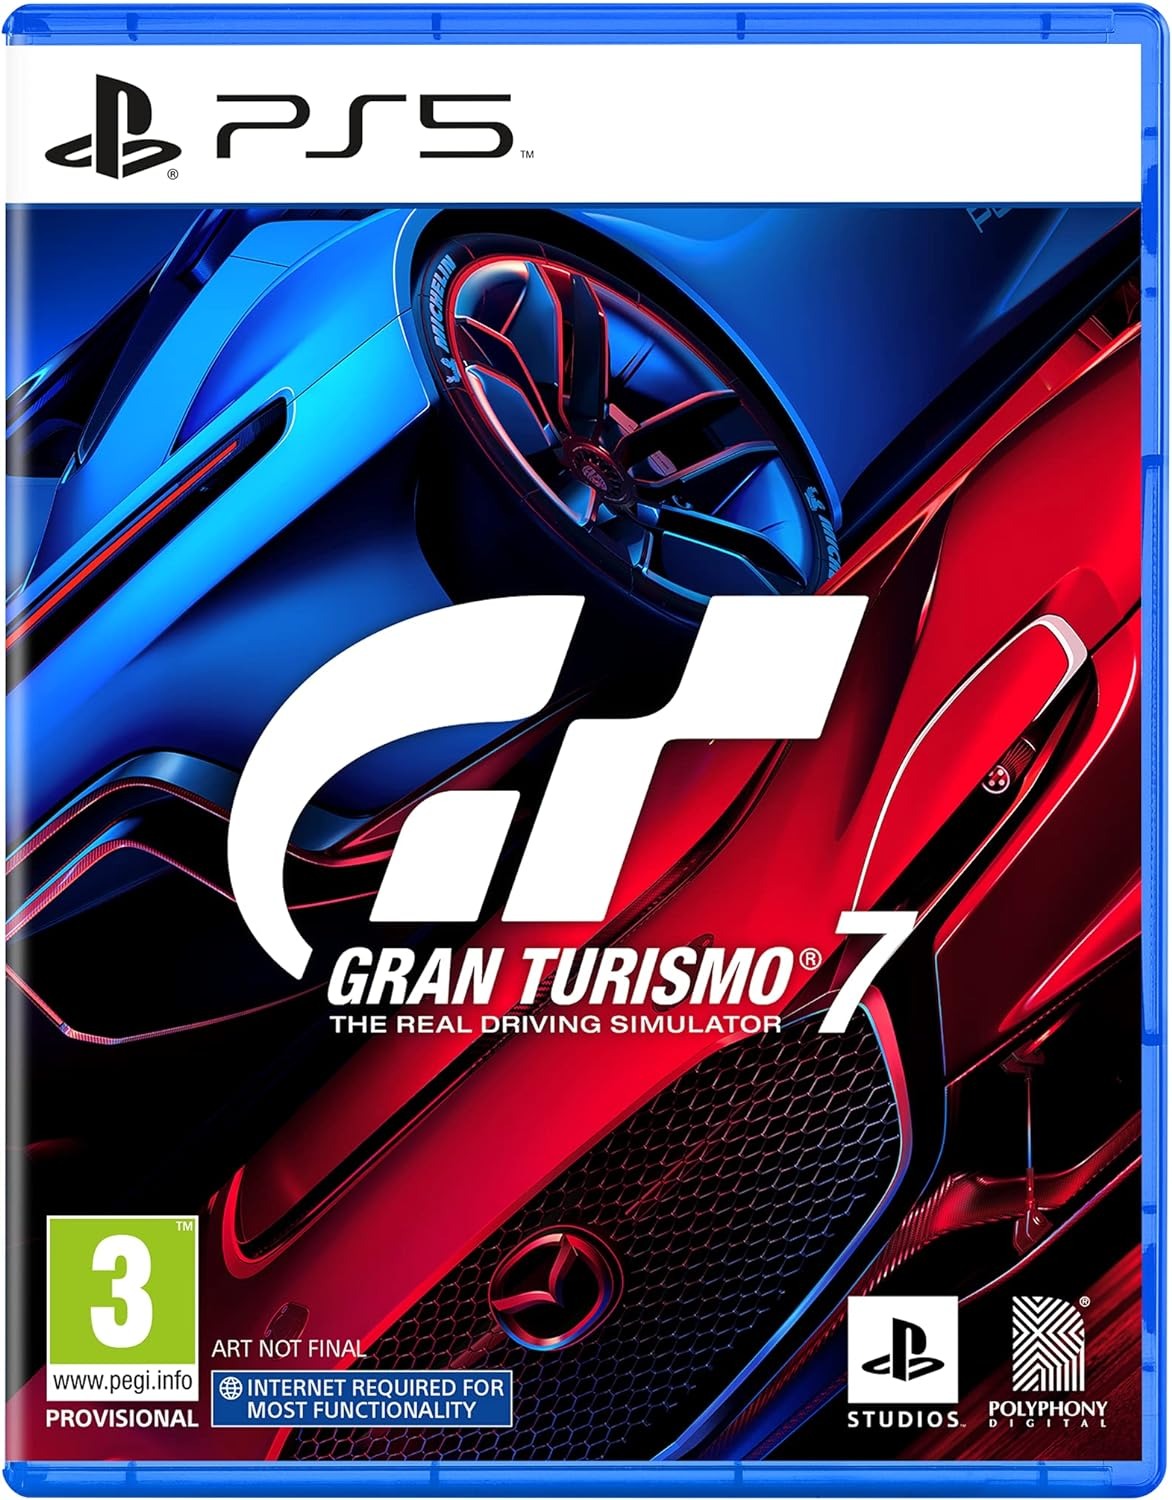 Gran Turismo 7: The Real Driving Simulator - Playstation 5 Title - Boxed